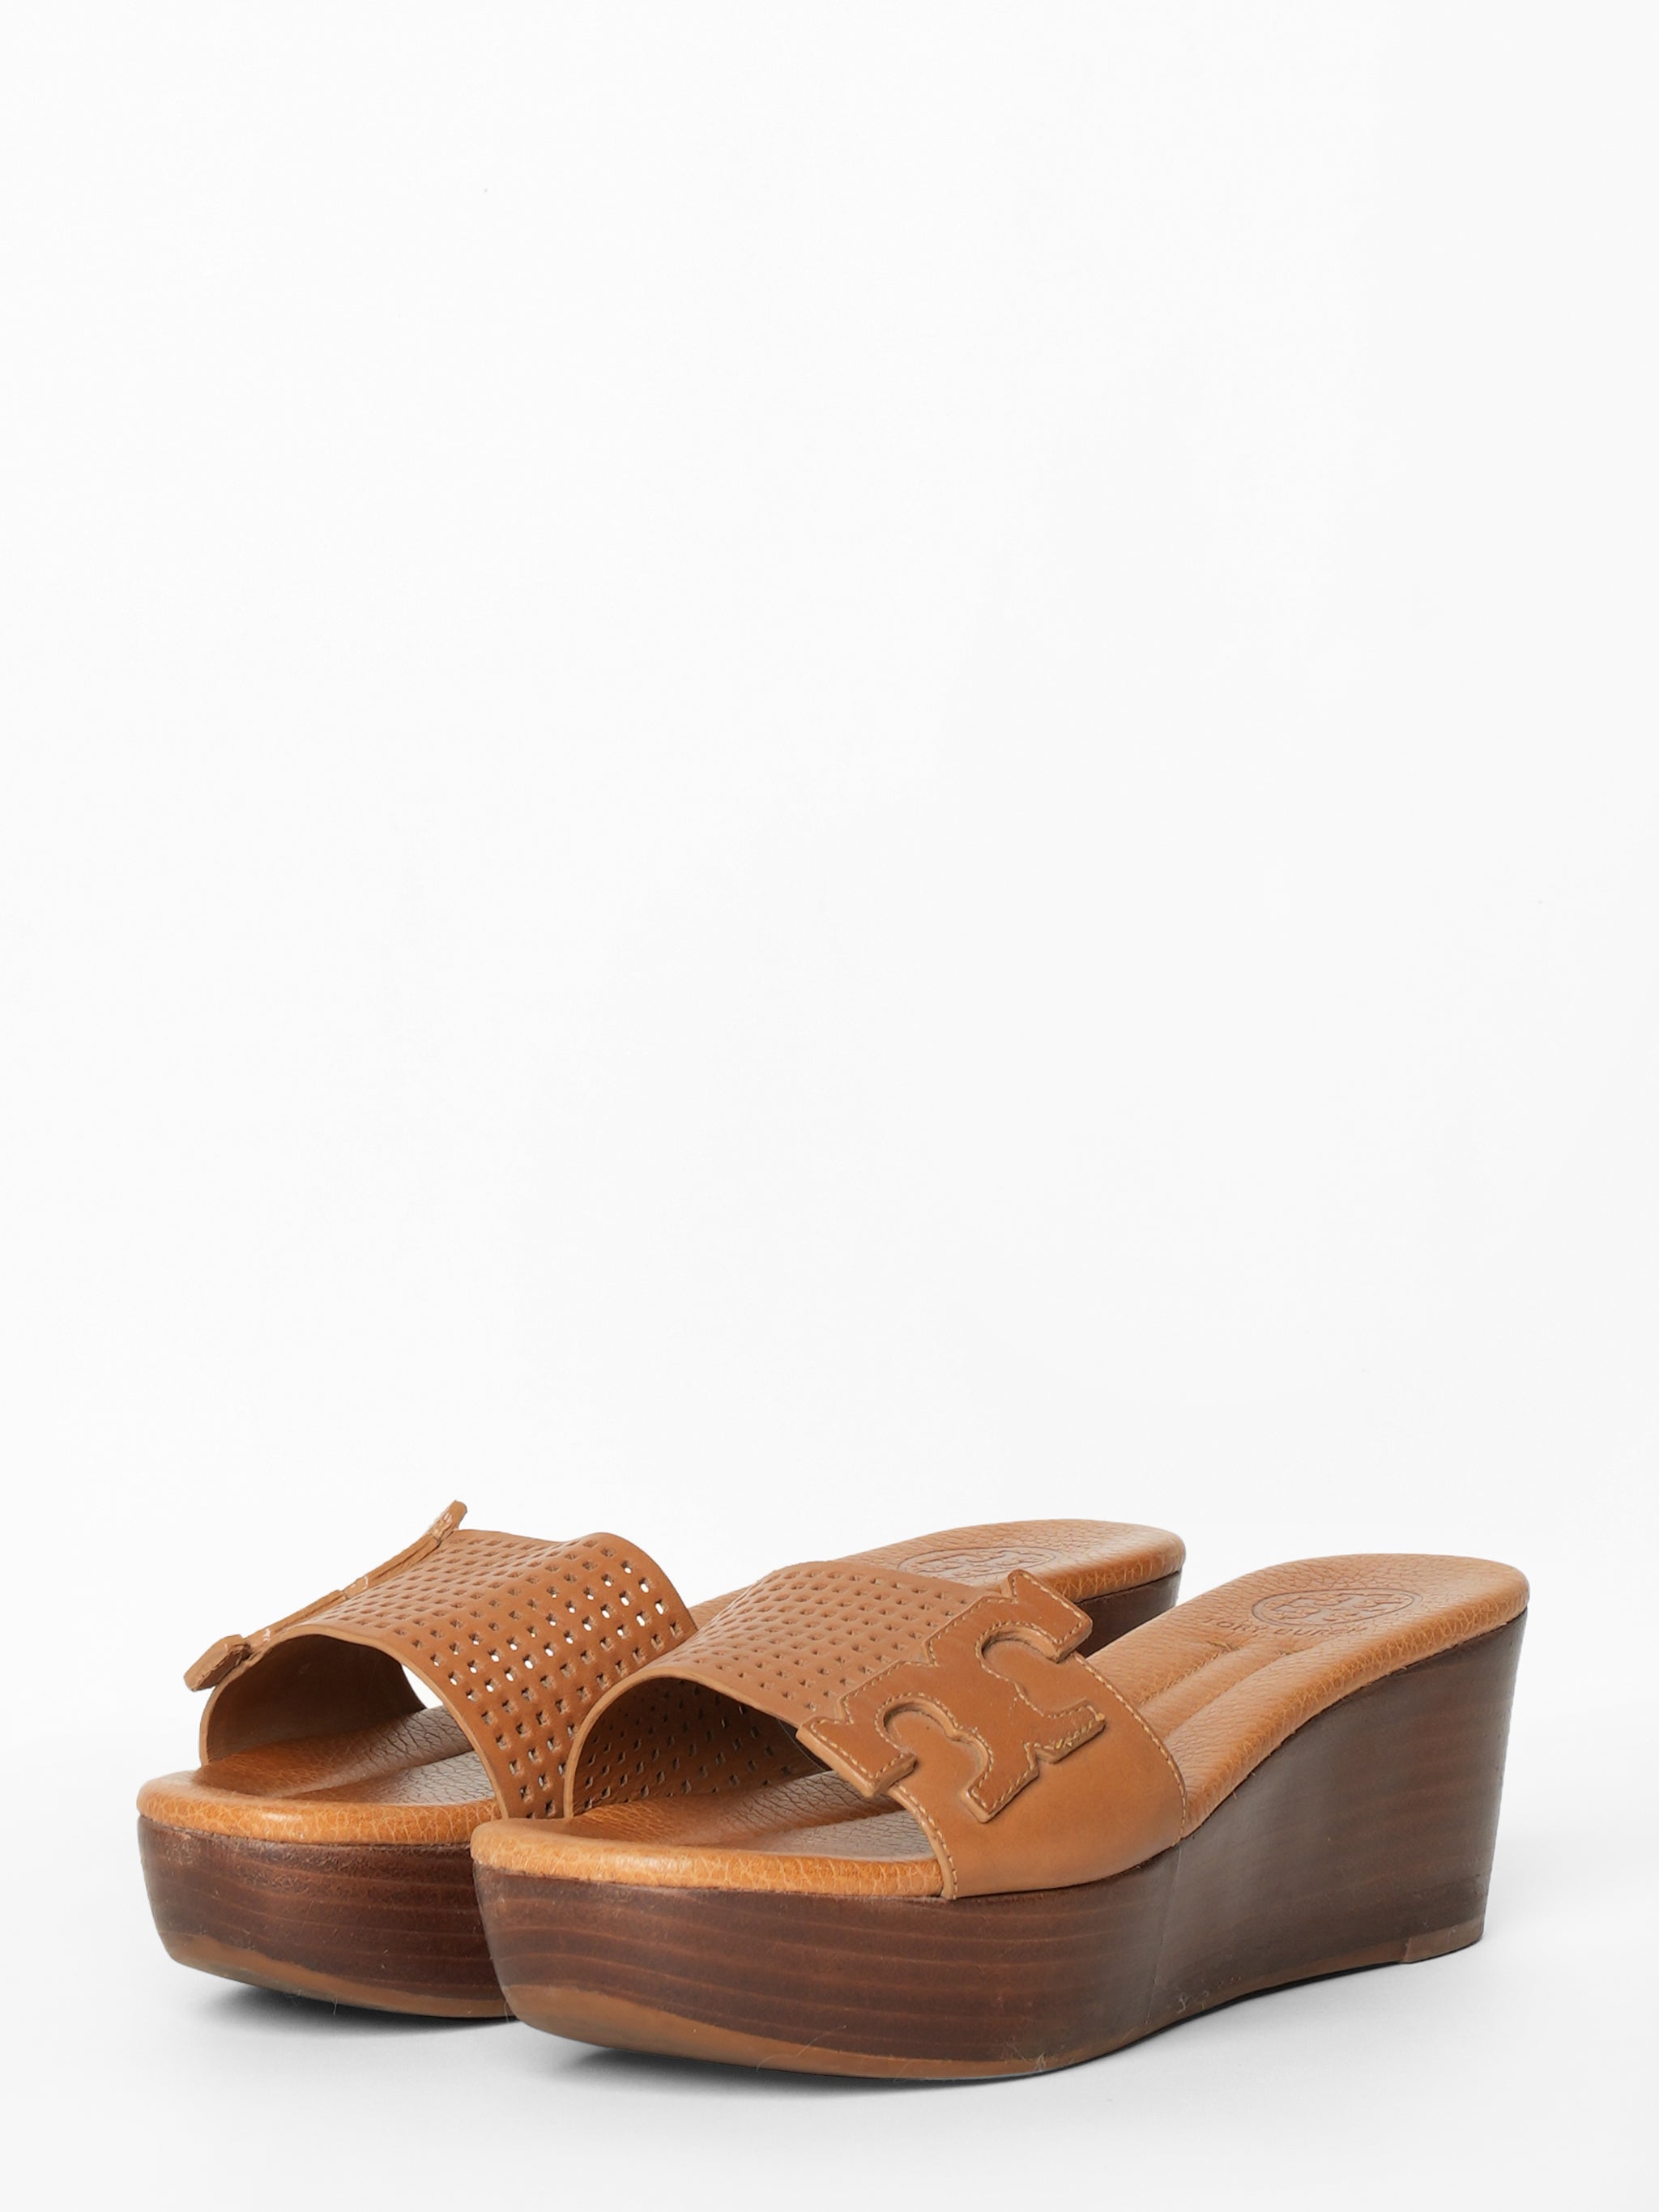 Tory Burch Leather Wedges